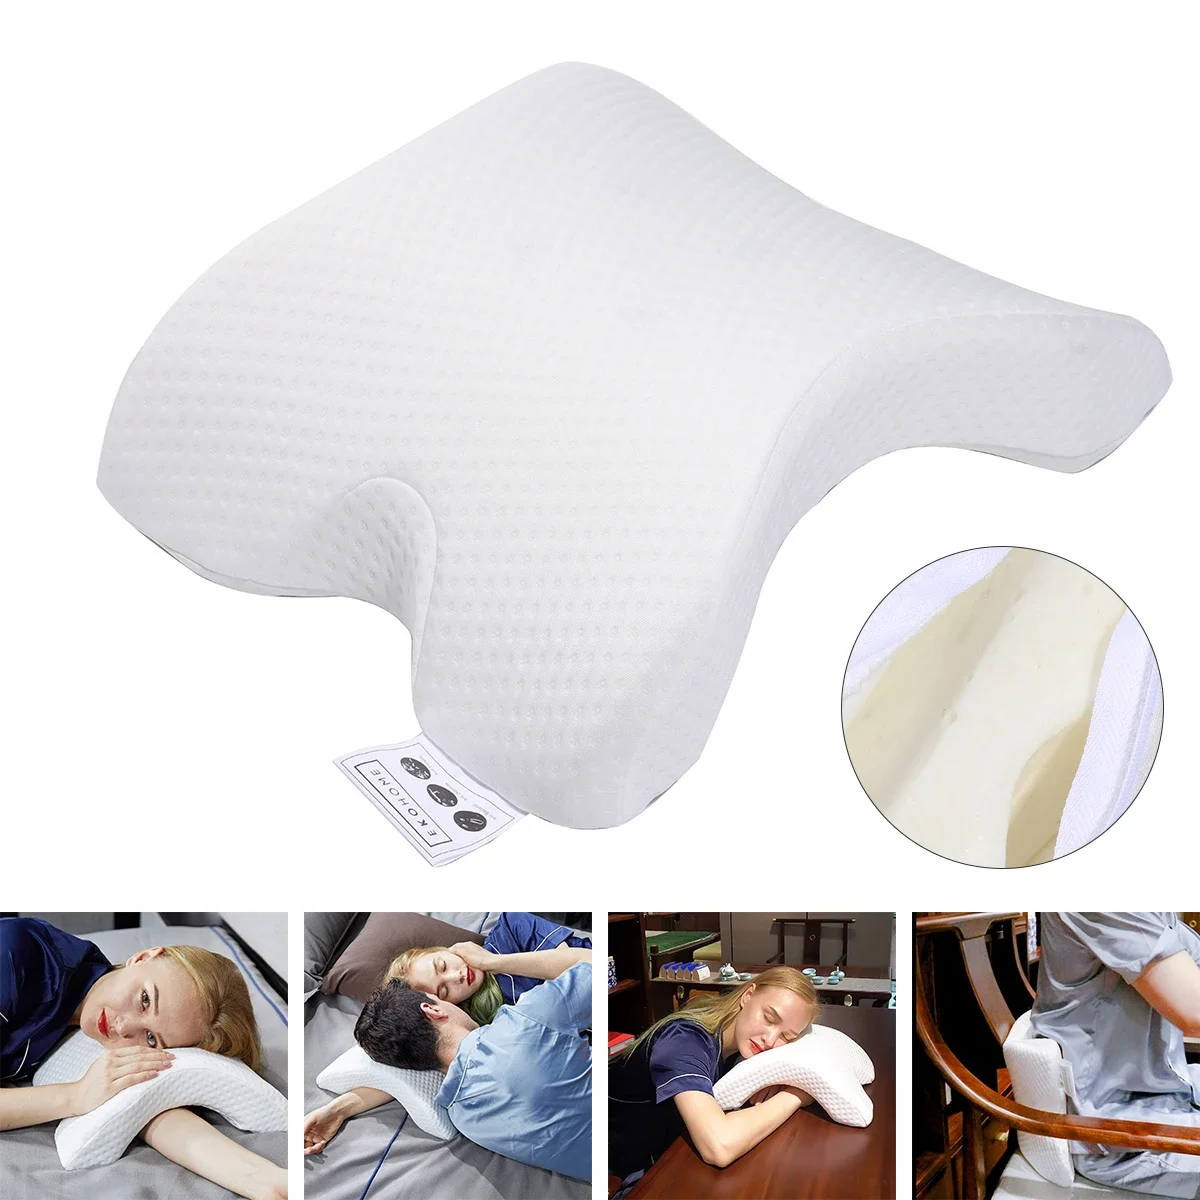 

35x30x13cm Arch U-Shaped Curved Memory Foam Pillow Arm Rest Sleeping Neck Cervical Pillow with Hollow Design